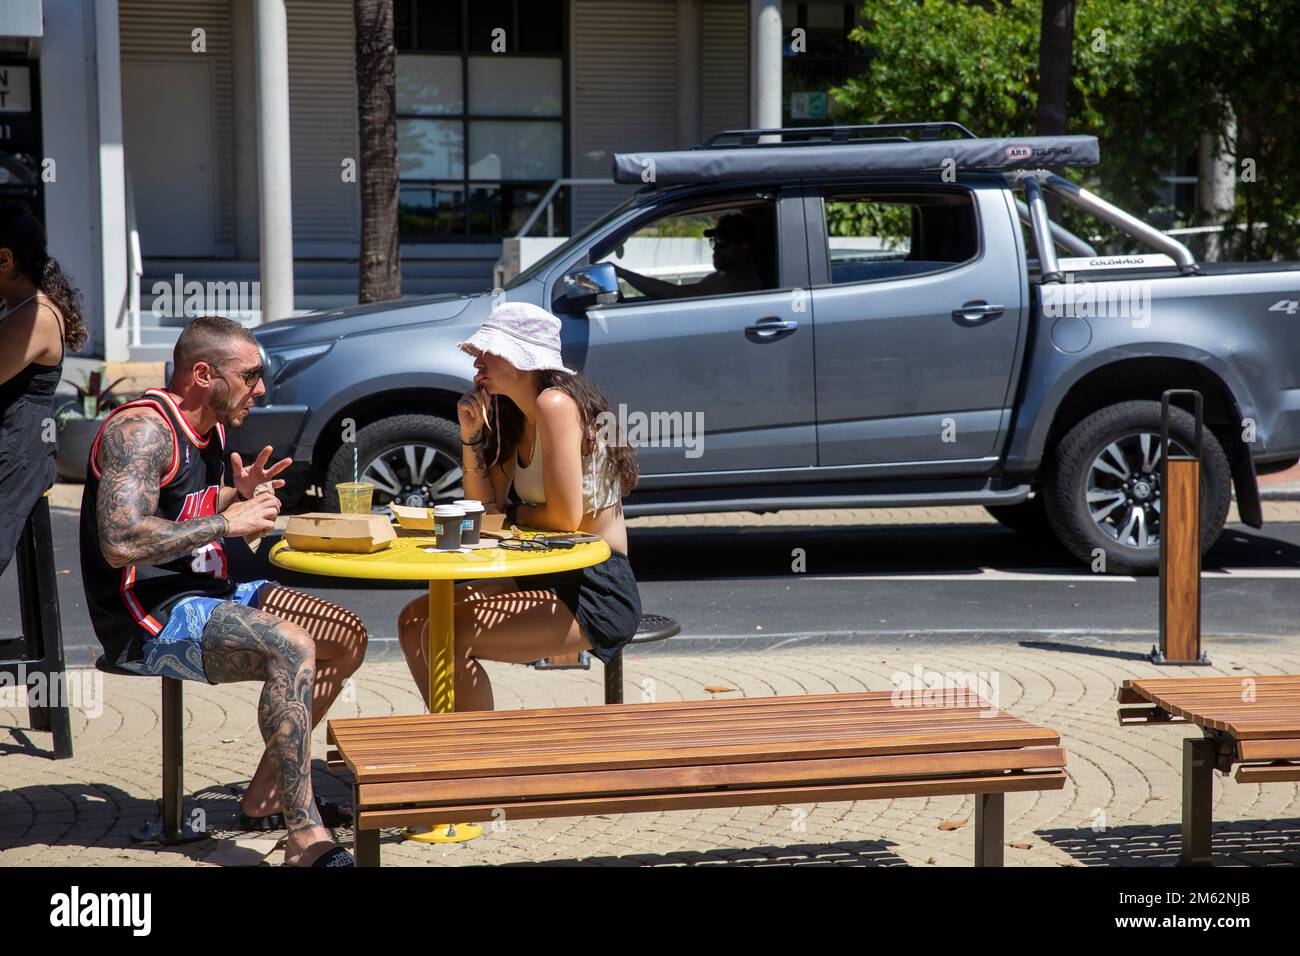 Couple out having coffee in Avalon Beach cafe, man is heavily tattooed on right arm and leg, young woman has no tattoos,Sydney,NSW,Australia Stock Photo